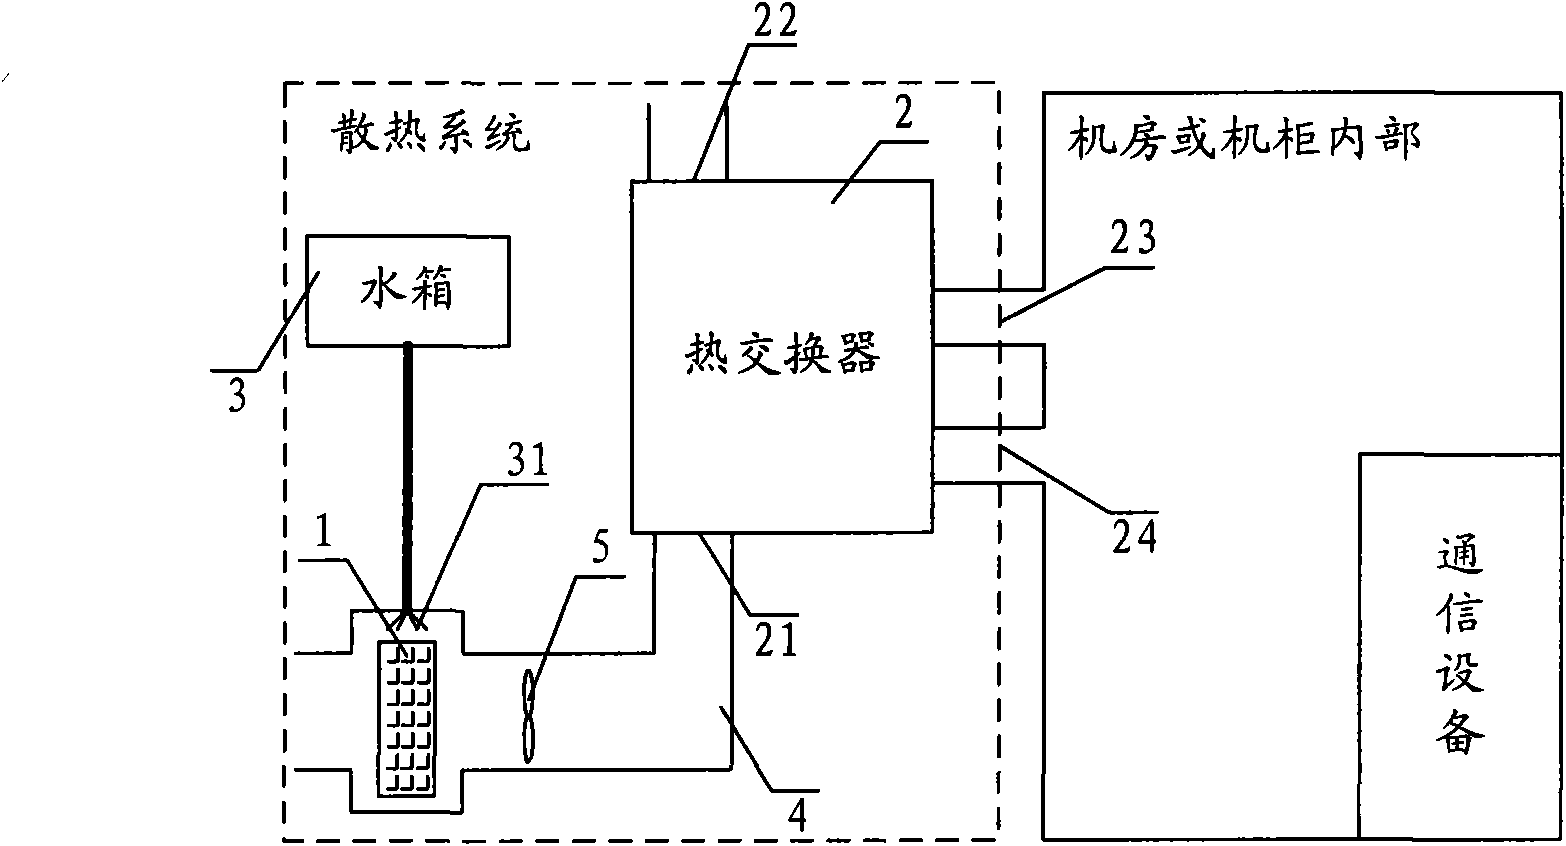 Cooling system and communication system